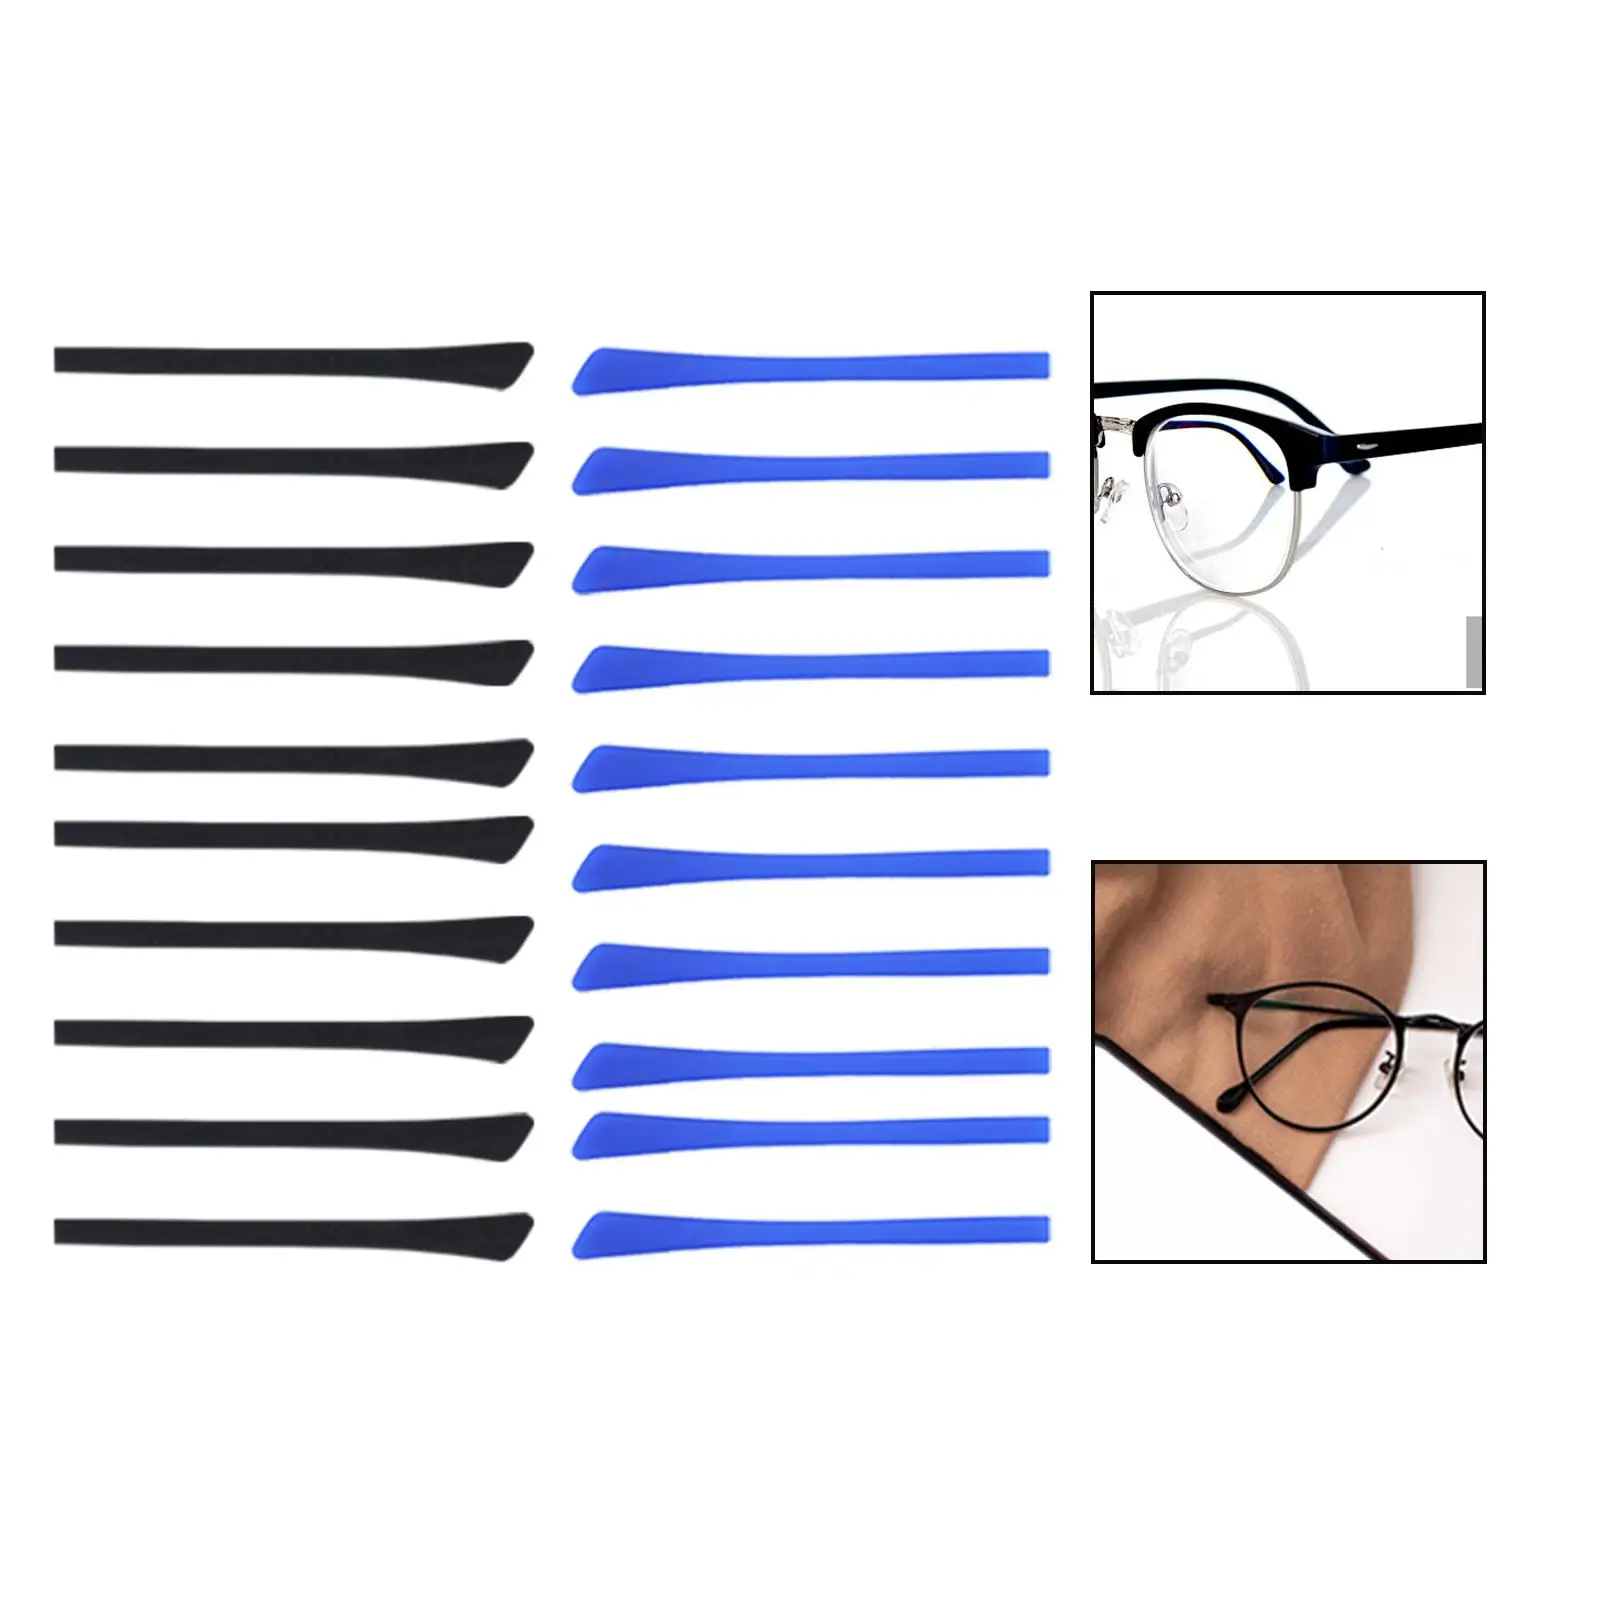 10x Silicone Temple End Tips Cushion Replacement Tips for Reading Glasses